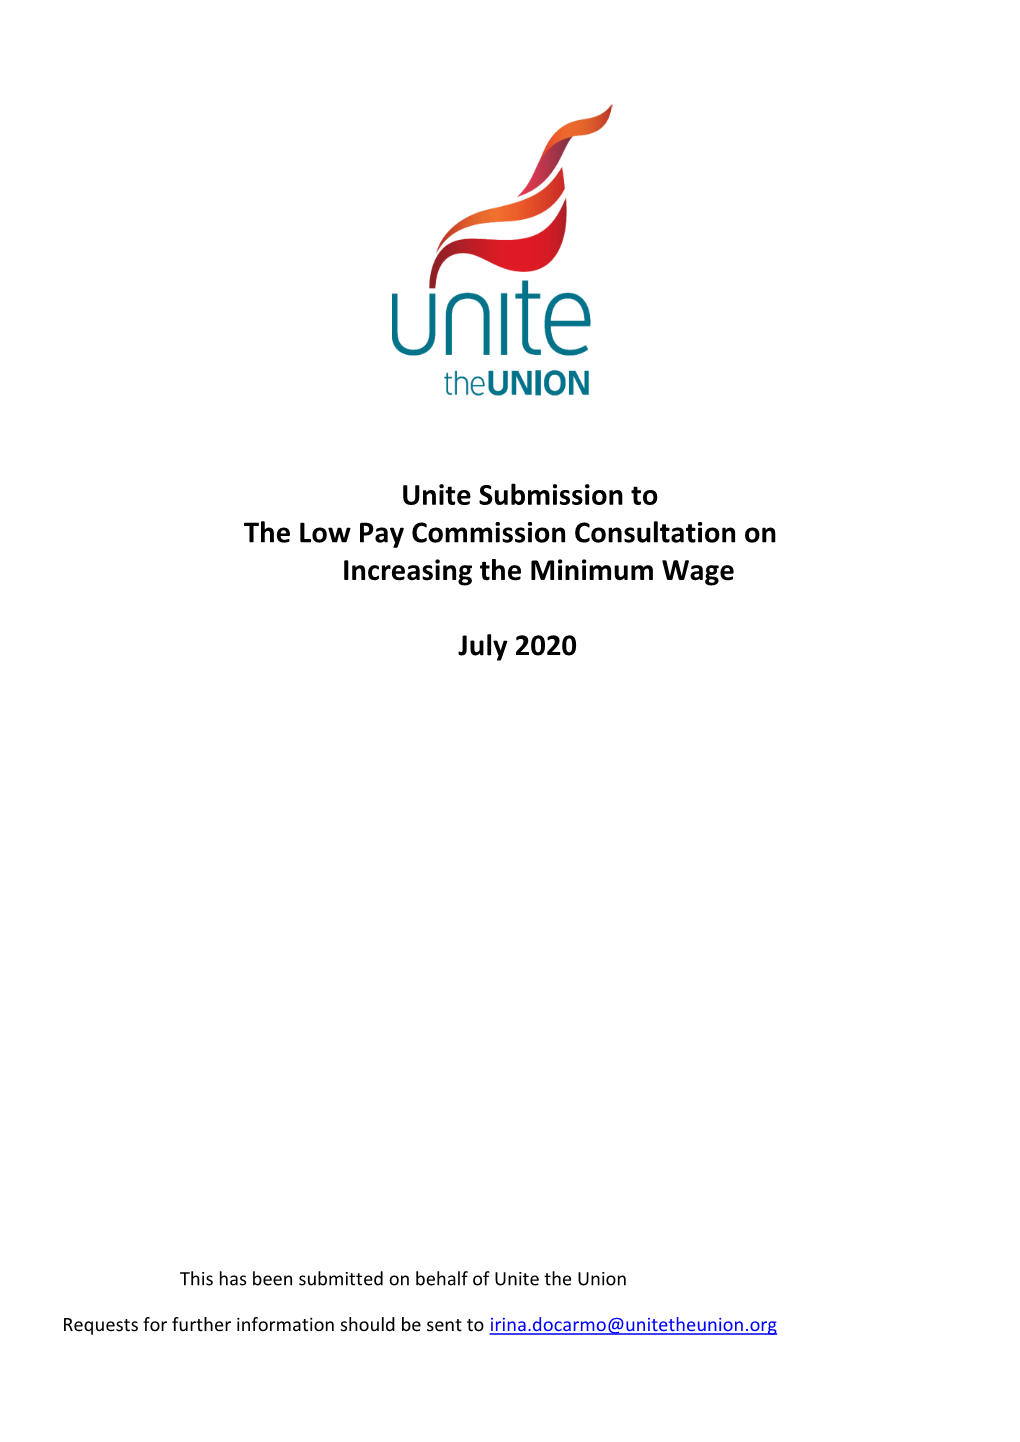 Unite Submission to the Low Pay Commission Consultation on Increasing the Minimum Wage